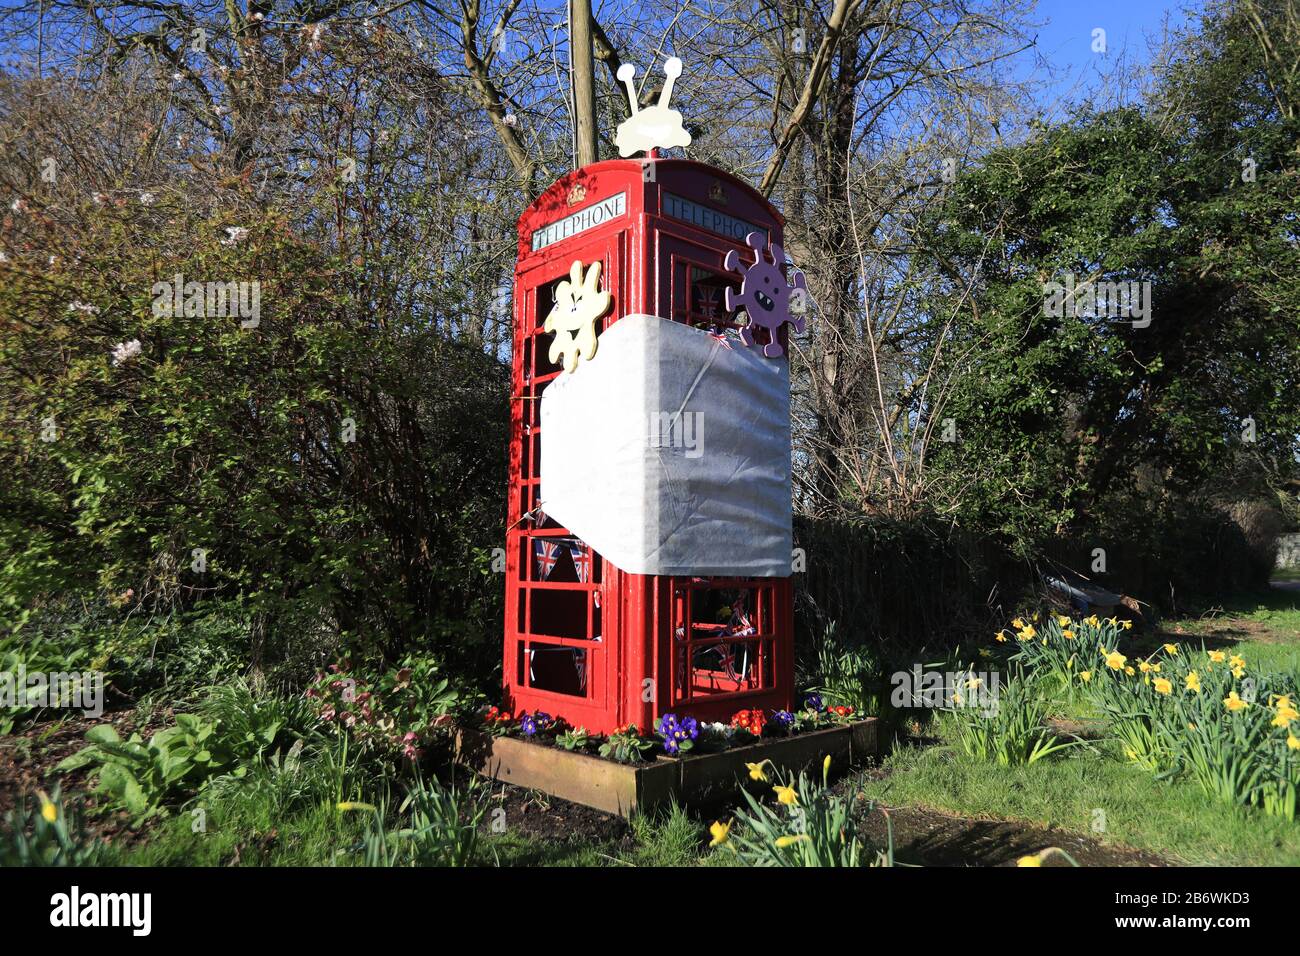 A decommissioned telephone box in the village of Orston, Nottinghamshire, which local residents have decorated with a so-called coronavirus theme, including a giant face mask and cartoon germs. Stock Photo